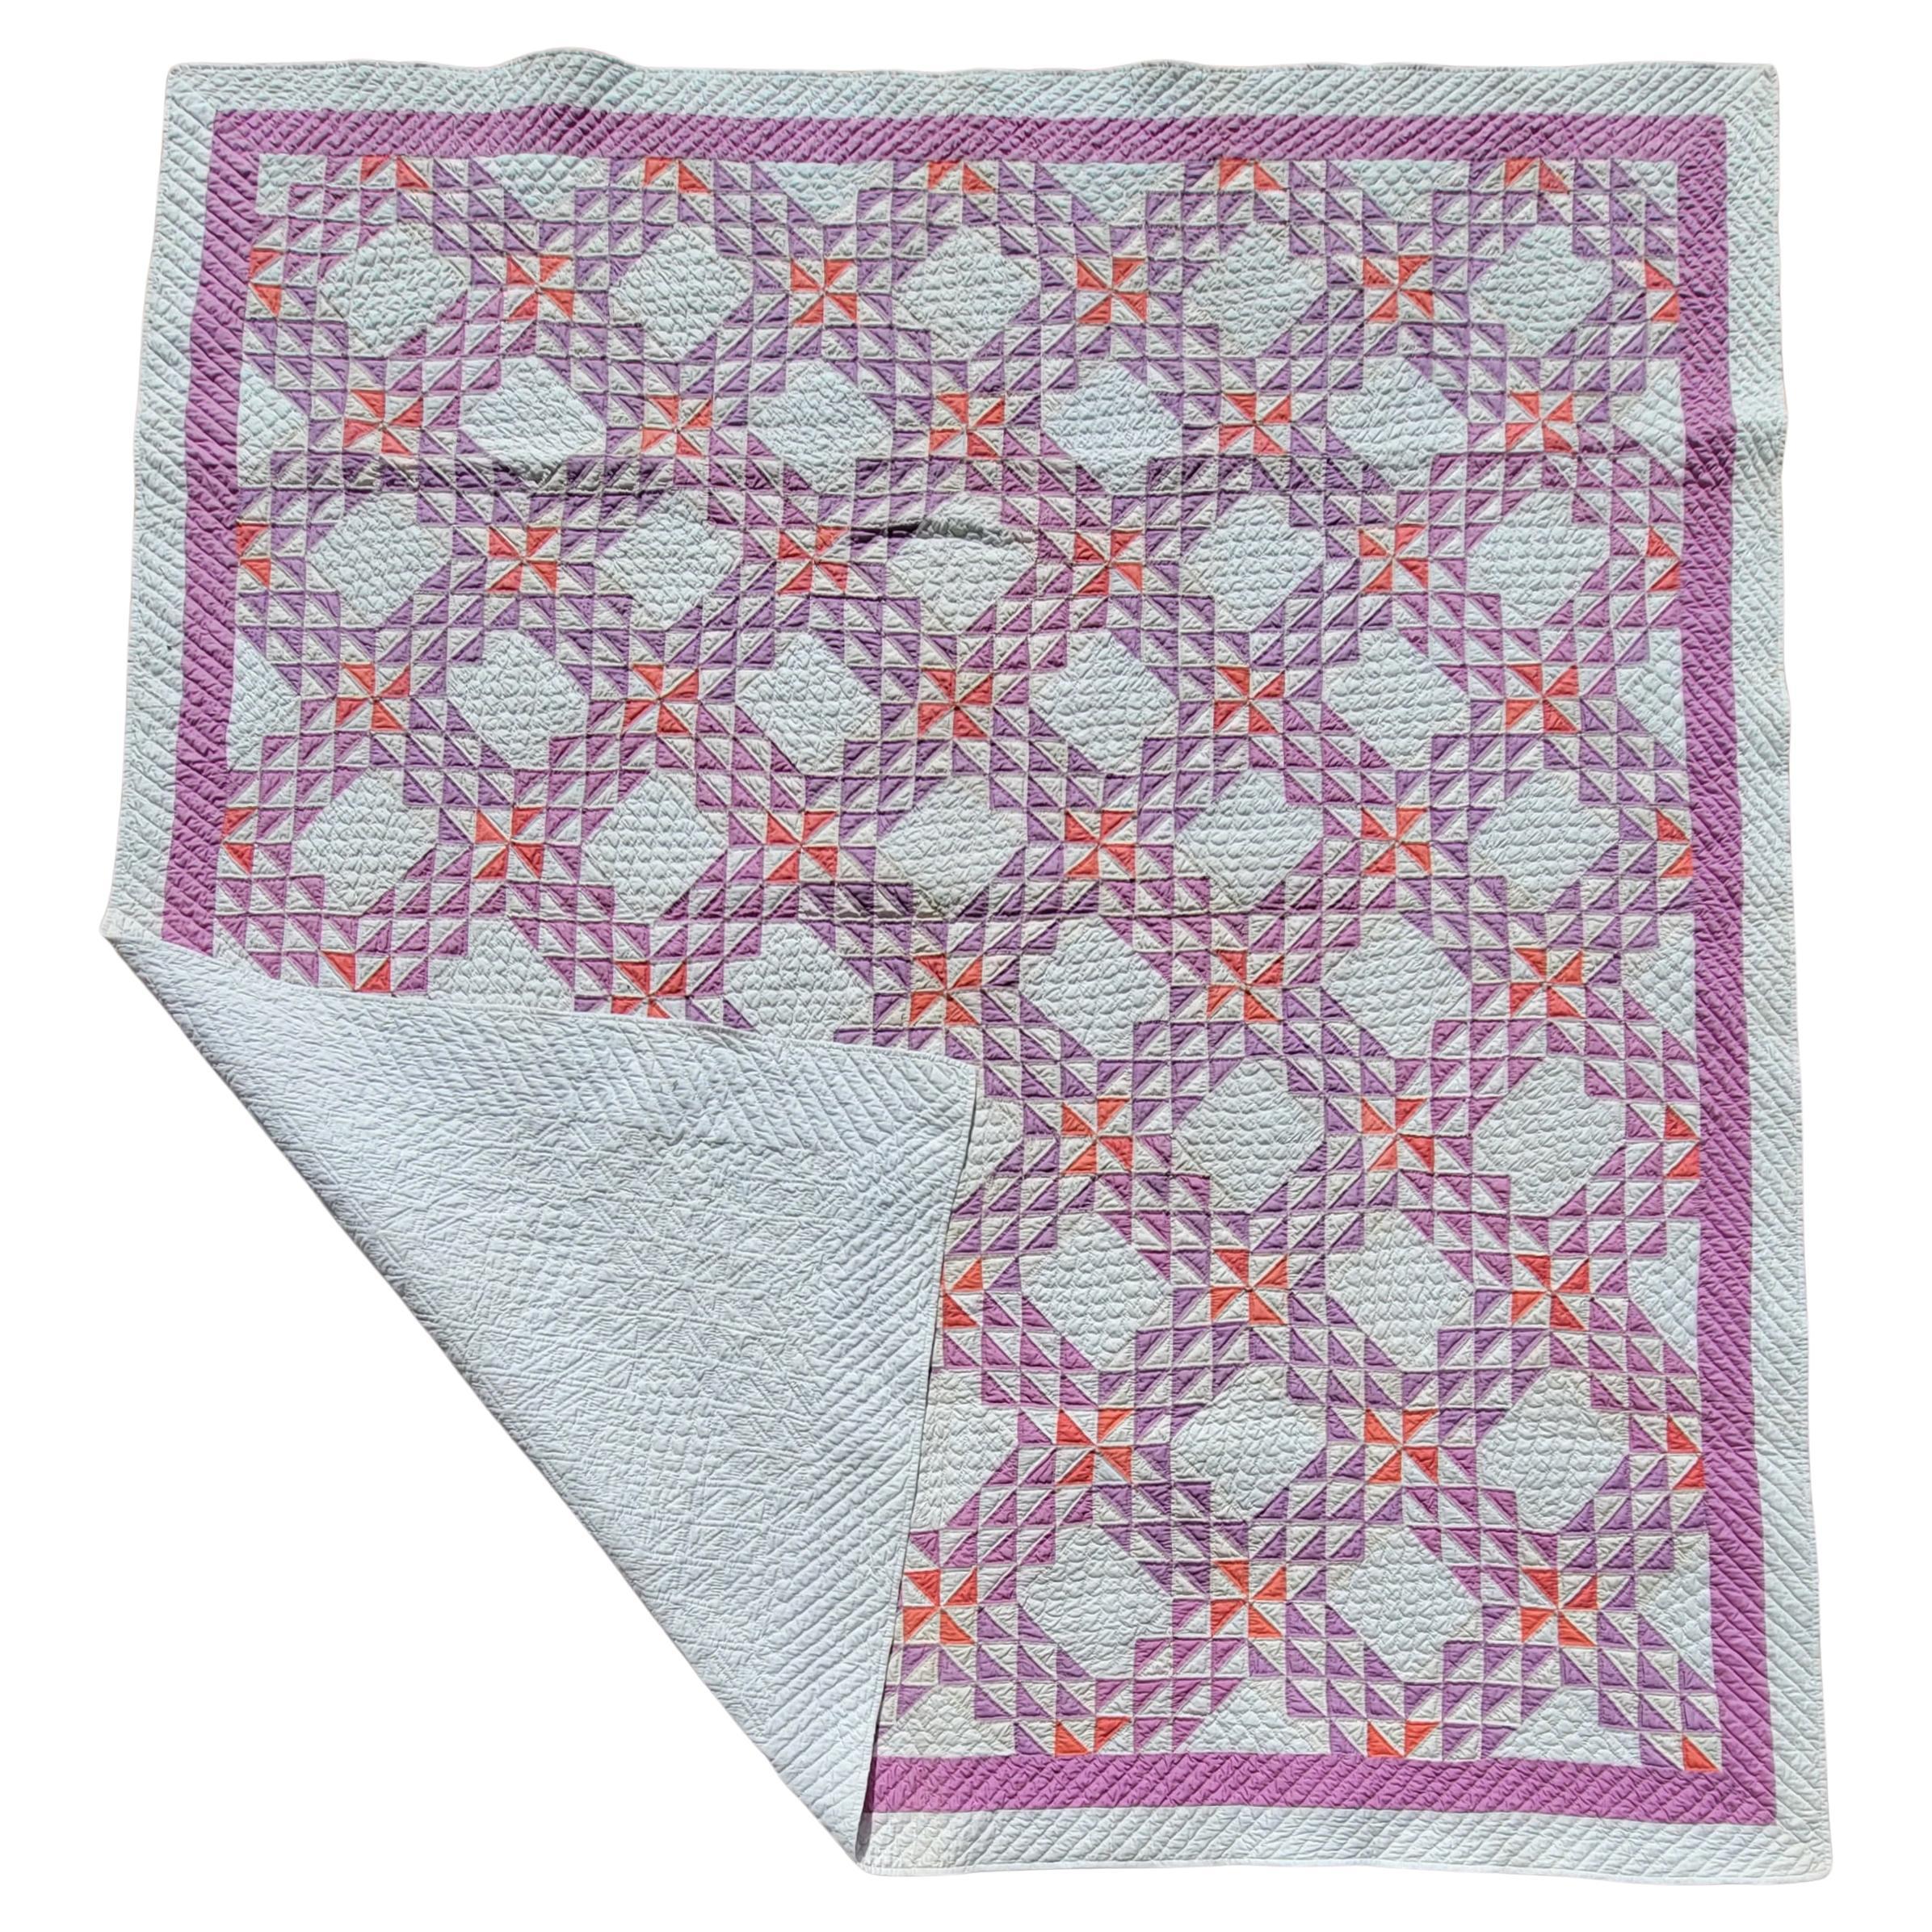 1920's Antique small piece Ocean waves quilt. Hand quilted in pastel lavender and pink. Pristine condition.